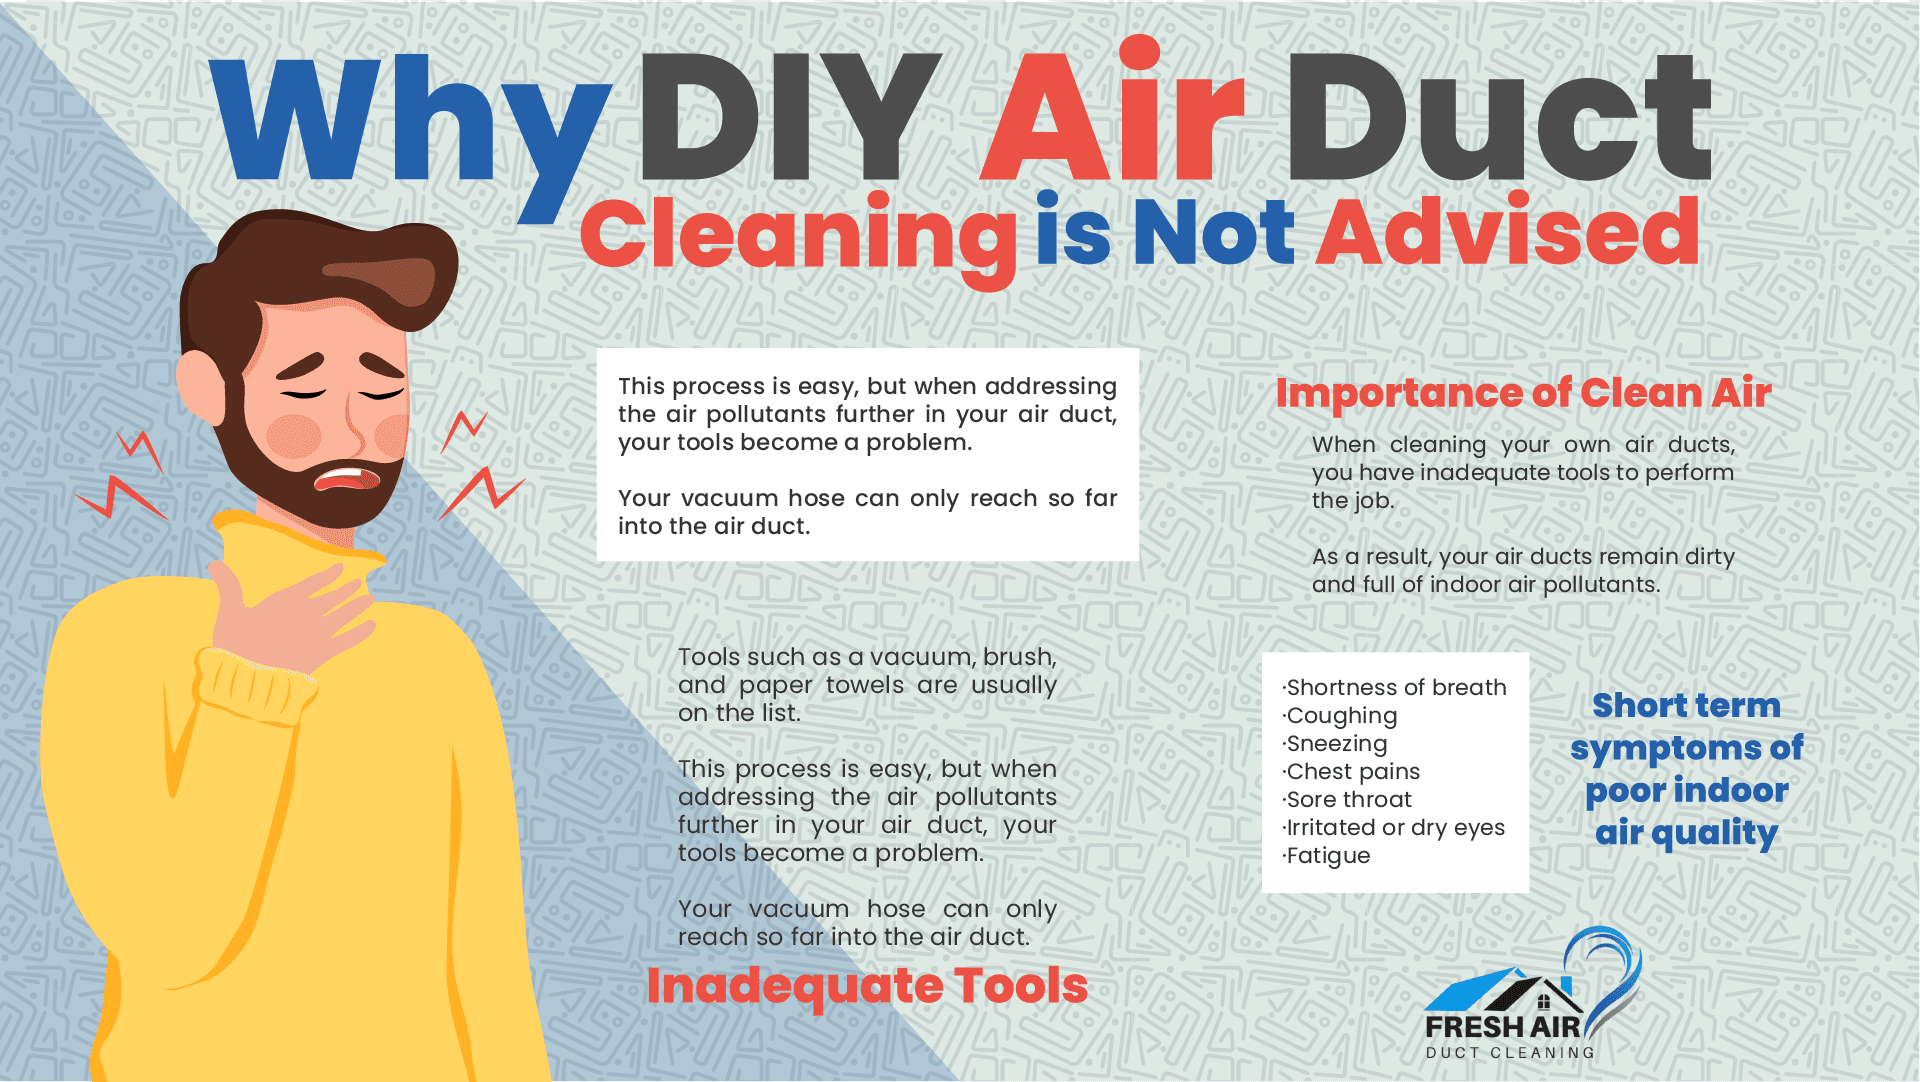 Why Diy Air Duct Cleaning Is Not